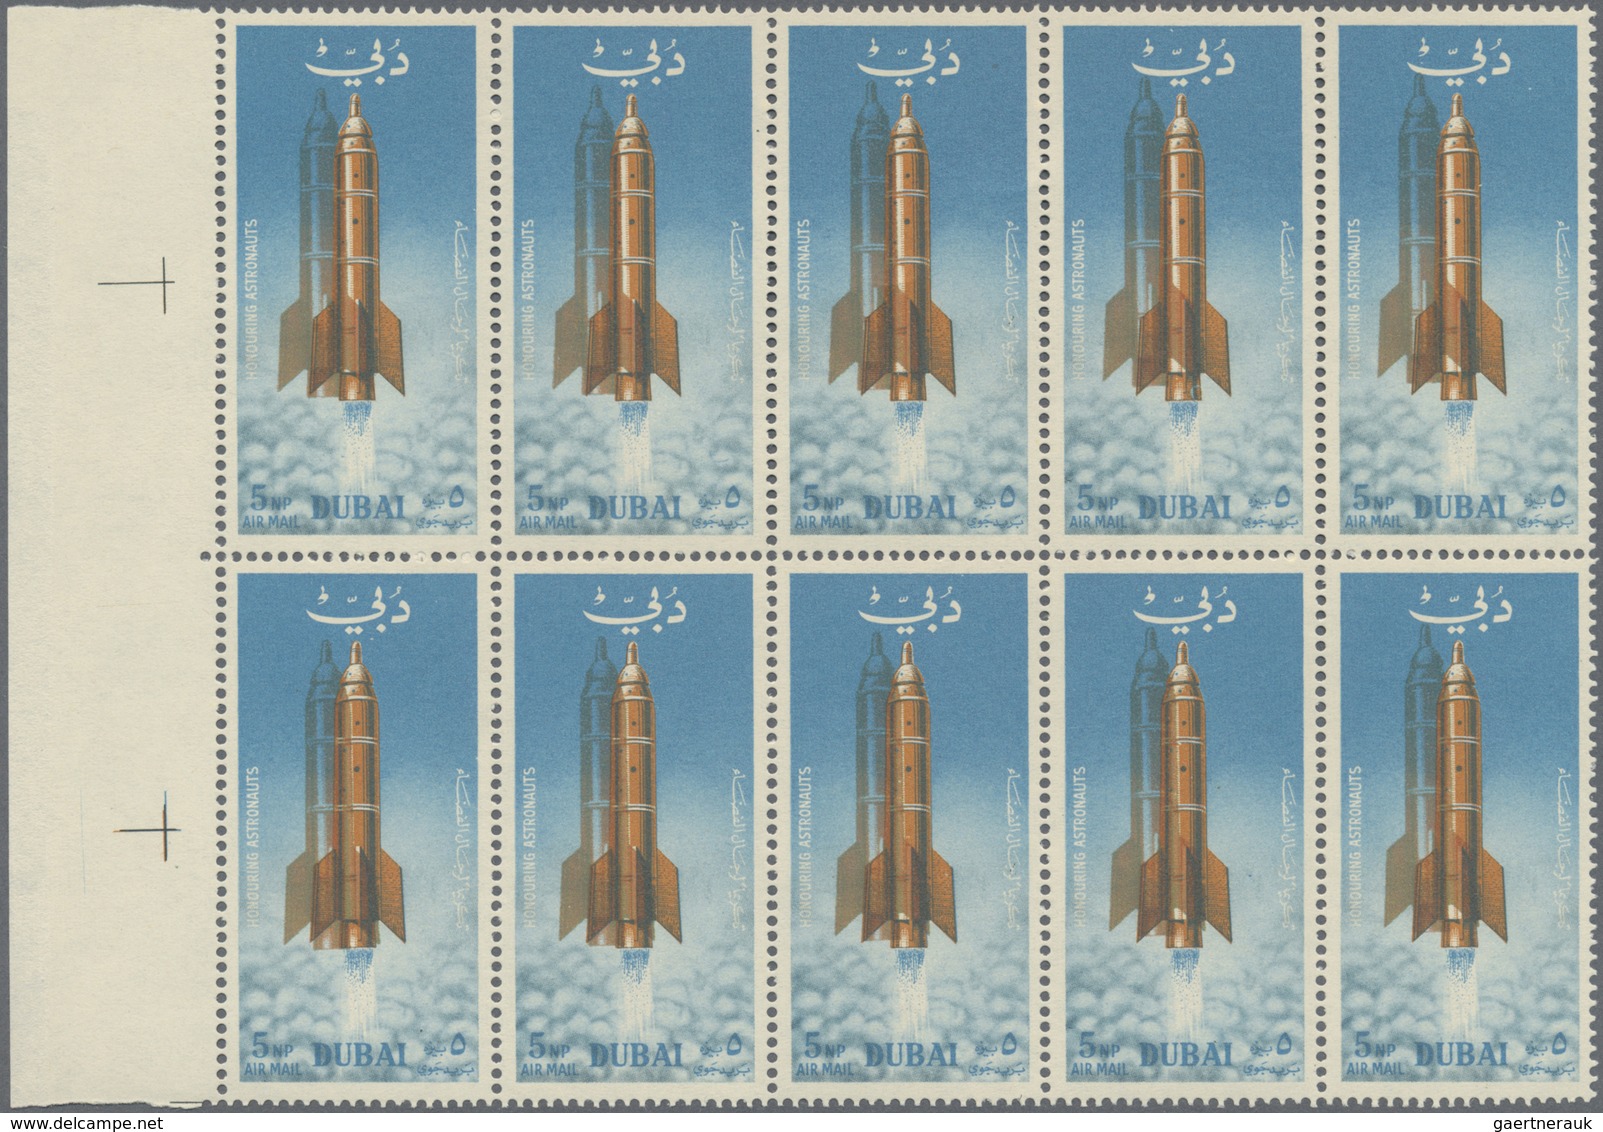 ** Dubai: 1964, Space Travel 5np. 'Rocket Taking Off' With DOUBLE PRINT Of ROCKET In A Perf. Block Of 1 - Dubai